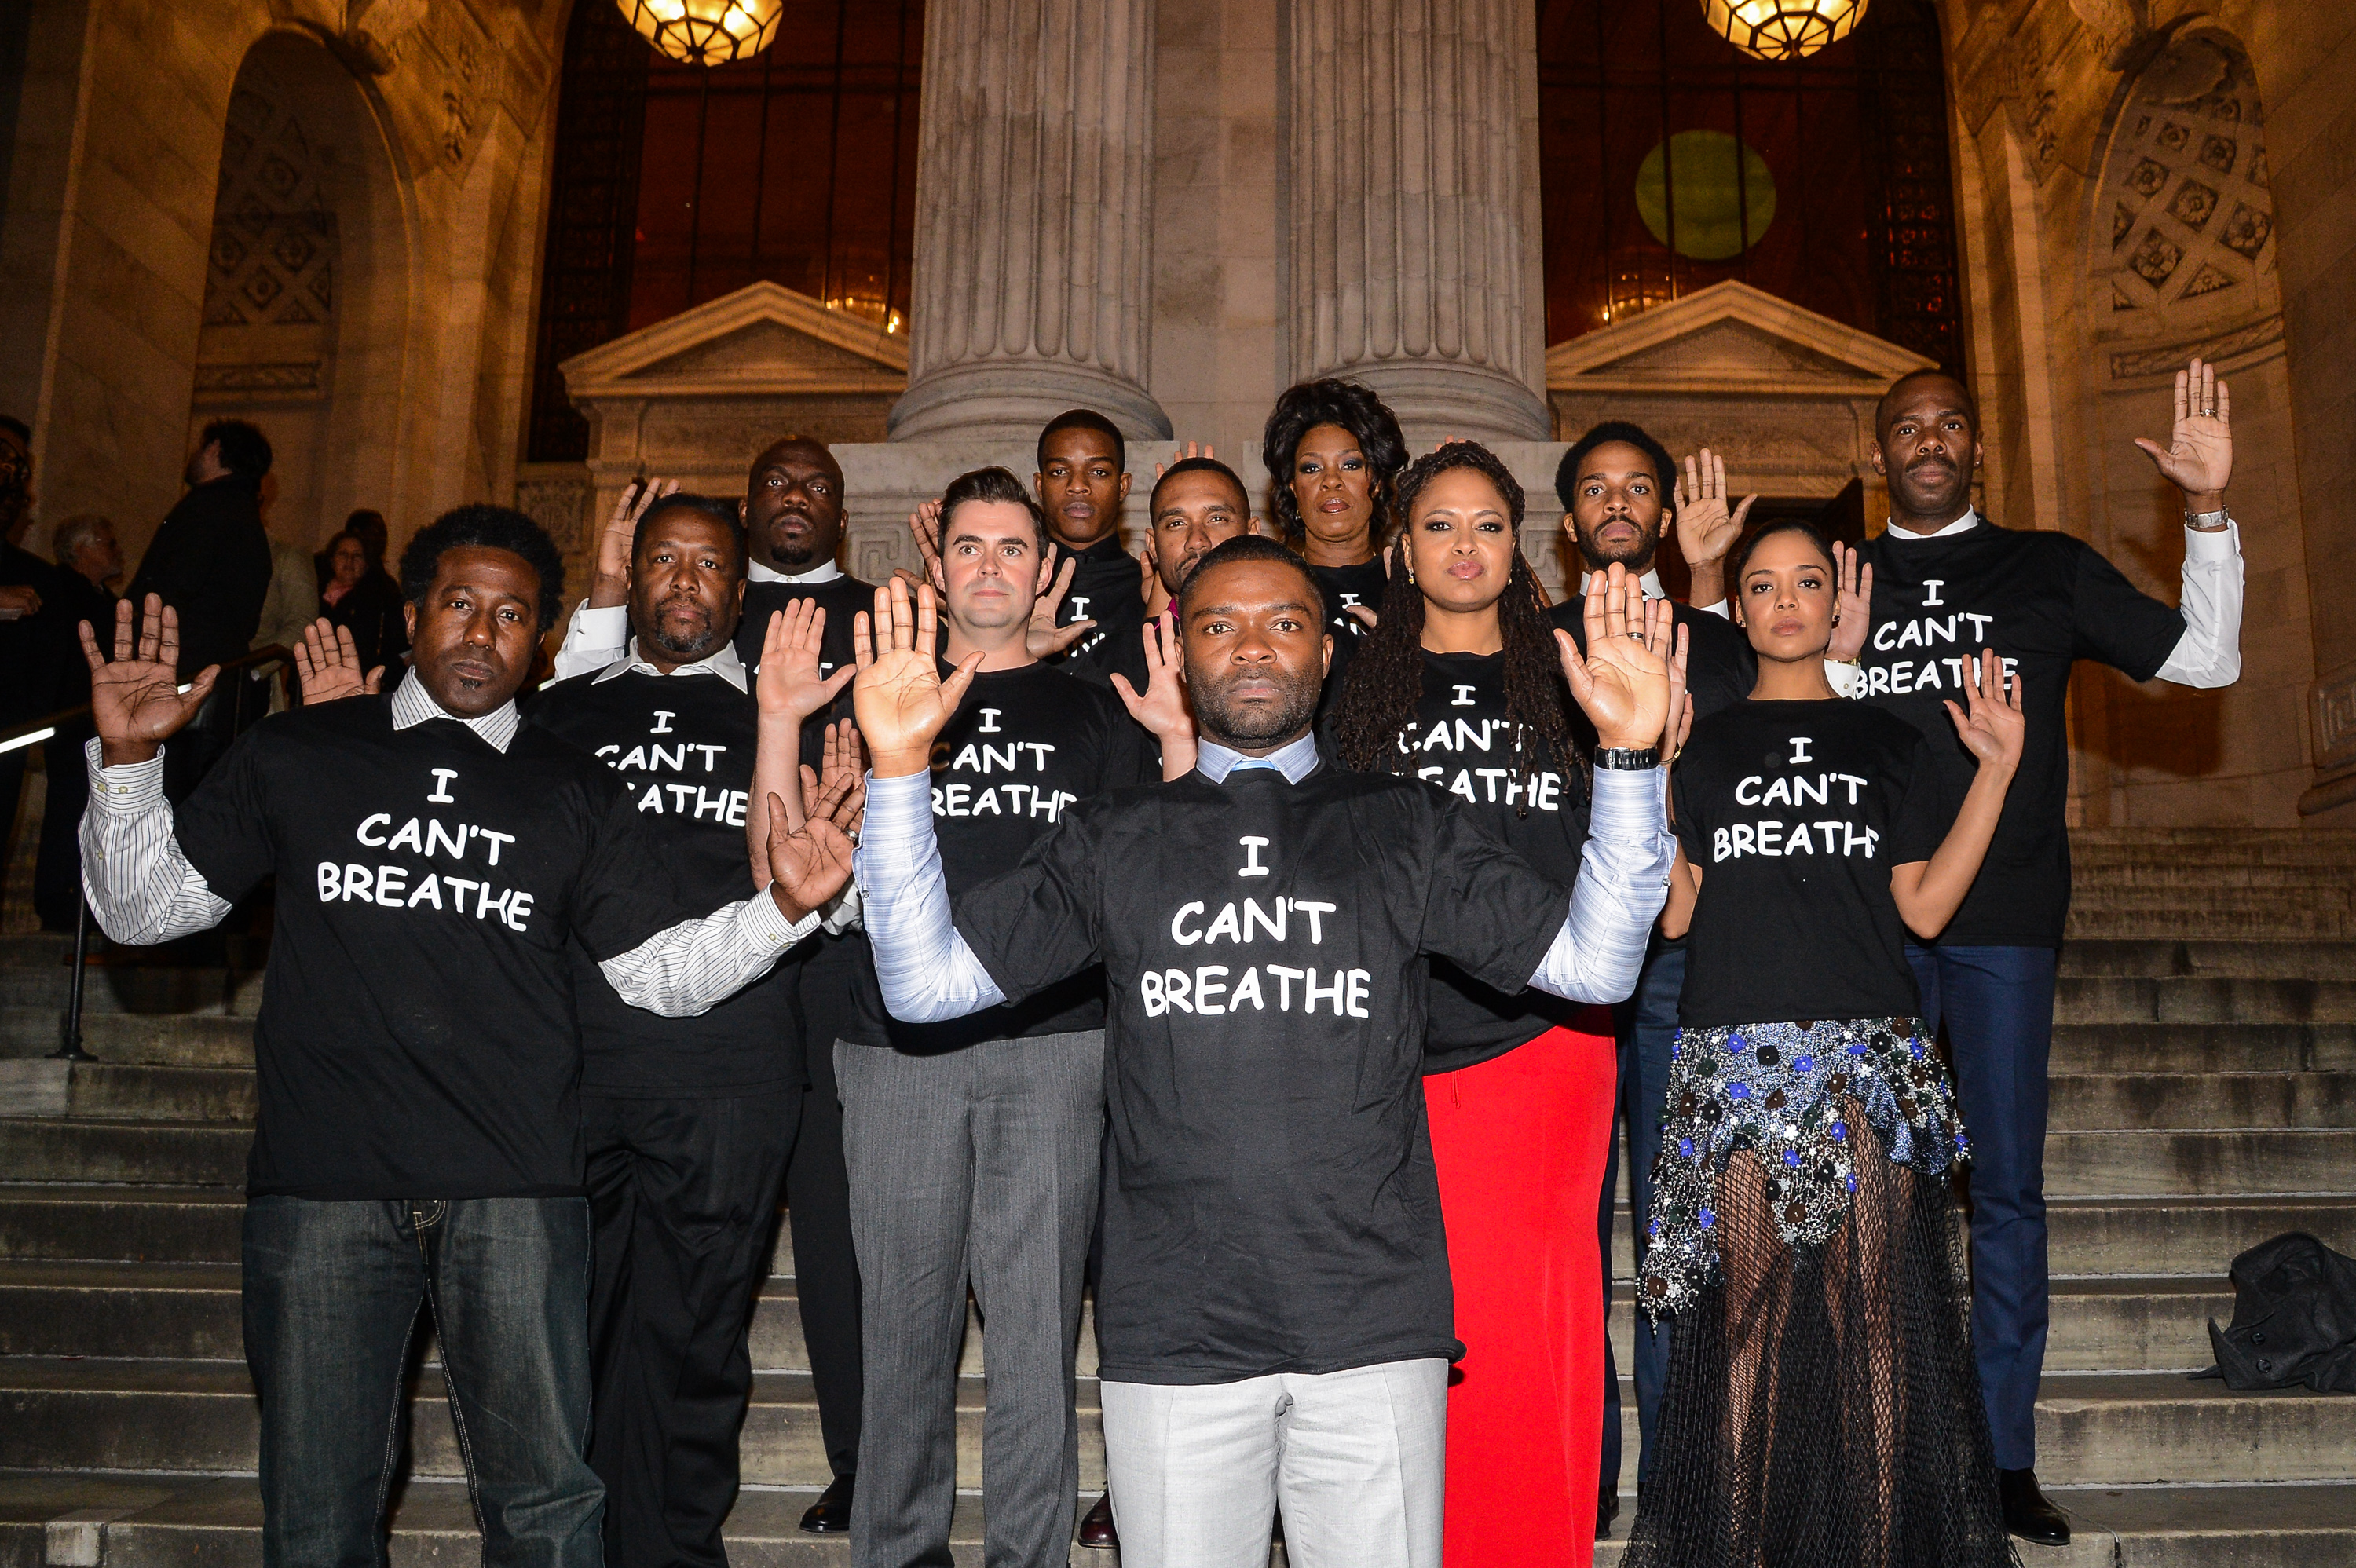 (L to R) "Selma" actors E. Roger Mitchell, Wendell Pierce, Omar Dorsey, John Lavelle, Stephan James, Kent Faulcon, David Oyelowo, Lorraine Toussaint, director Ava DuVernay, Tessa Thompson, Andre Holland, and Colman Domingo wear "I Can't Breathe" t-shirts to protest the death of Eric Garner at the New York Public Library on December 14, 2014 in New York City (Ray Tamarra&mdash;GC Images)